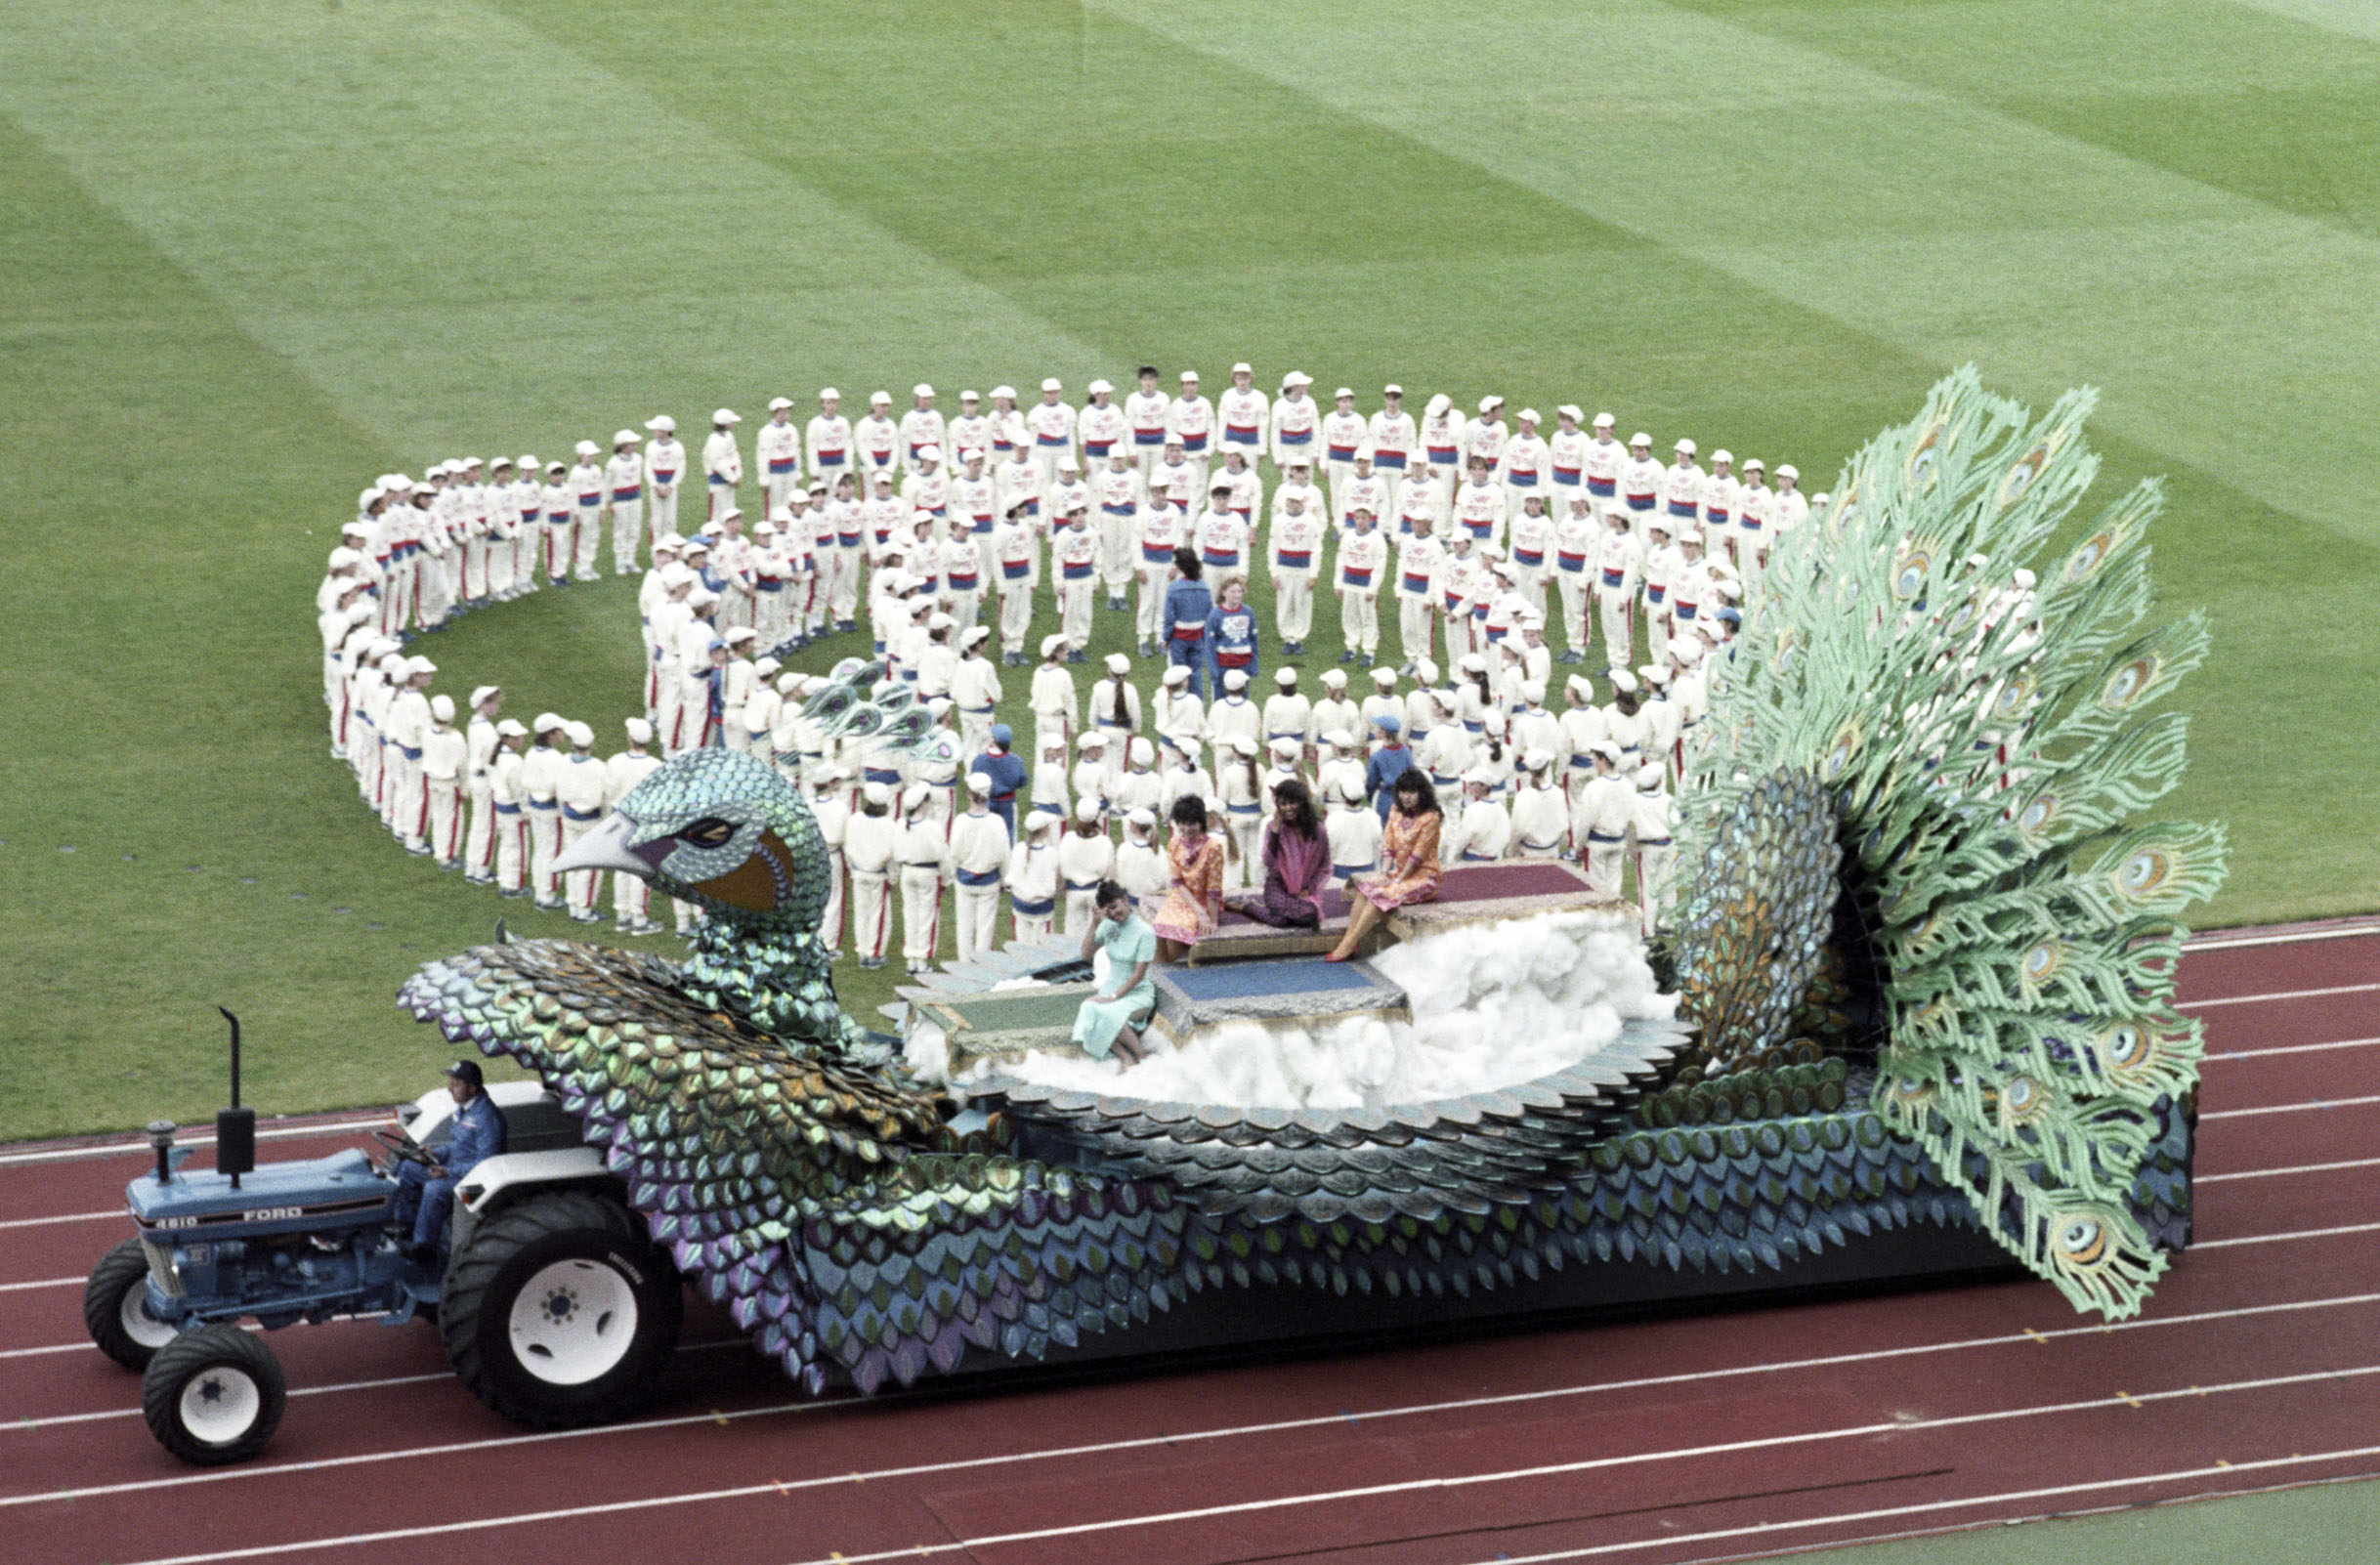 One of the attractions rolls around the athletics track as the curtain fell on the 1986 Games.